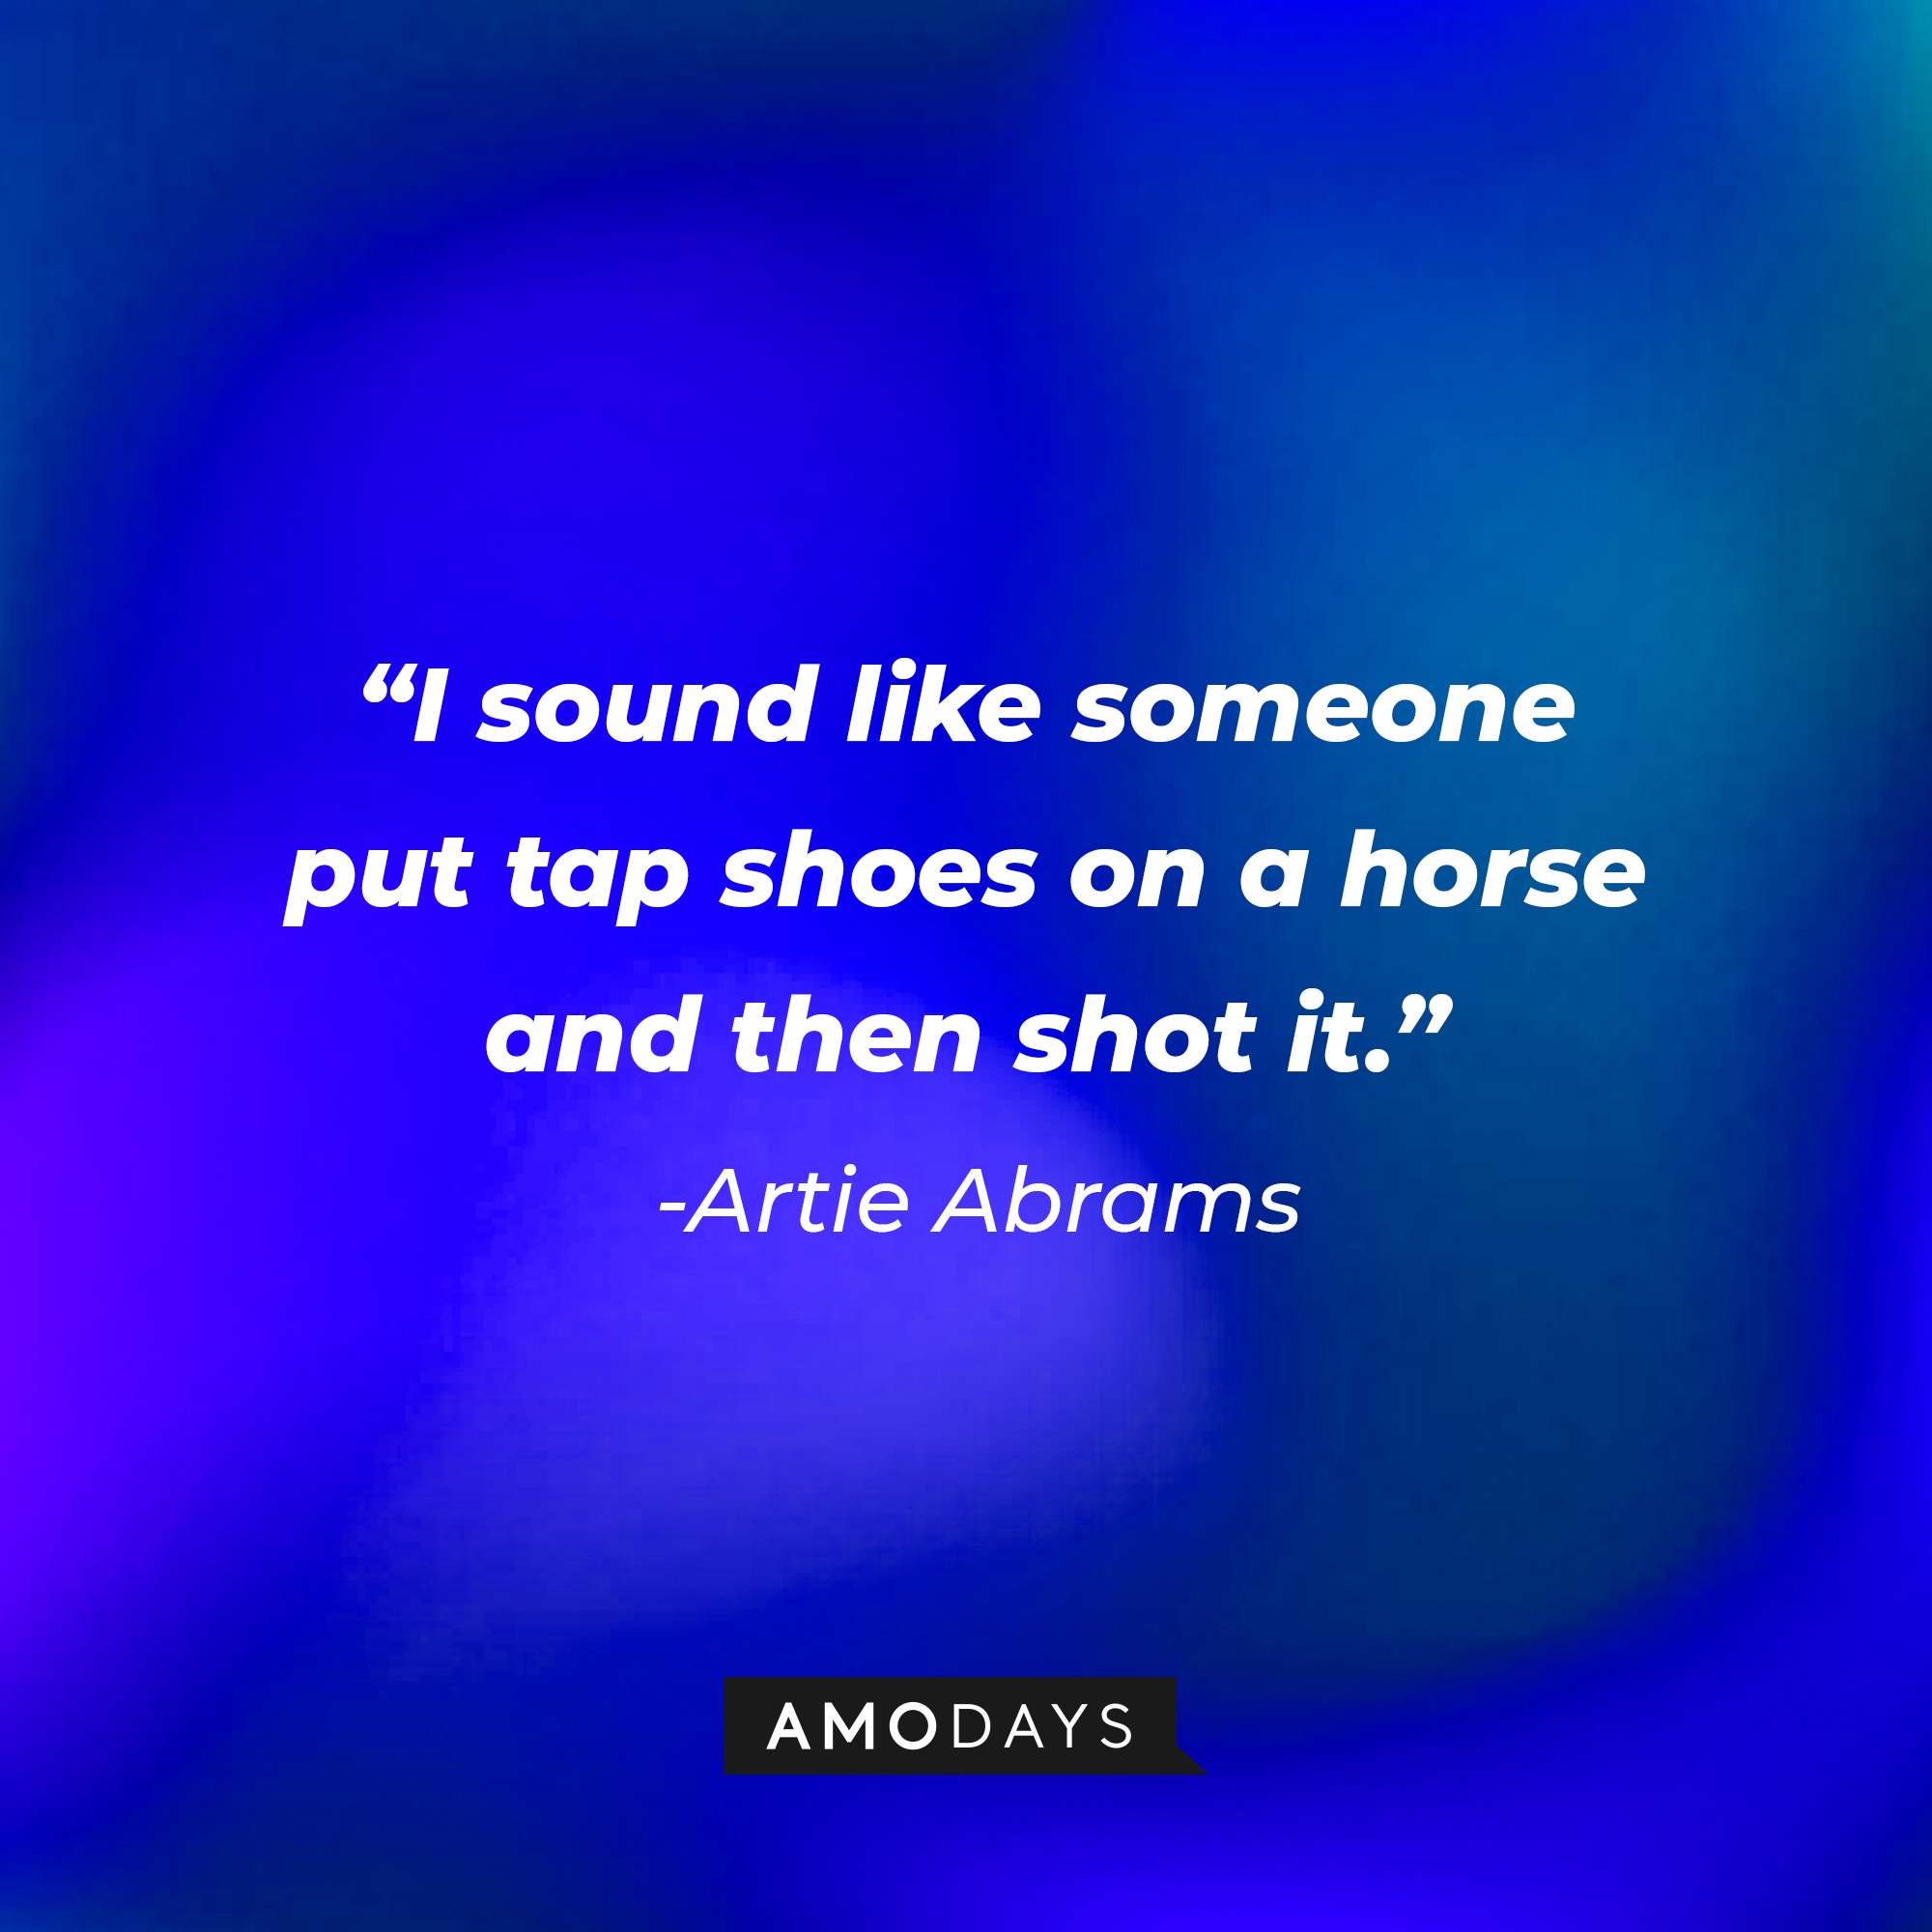 Artie Abrams’s quote from “Glee”: “I sound like someone put tap shoes on a horse and then shot it.” | Image: AmoDays